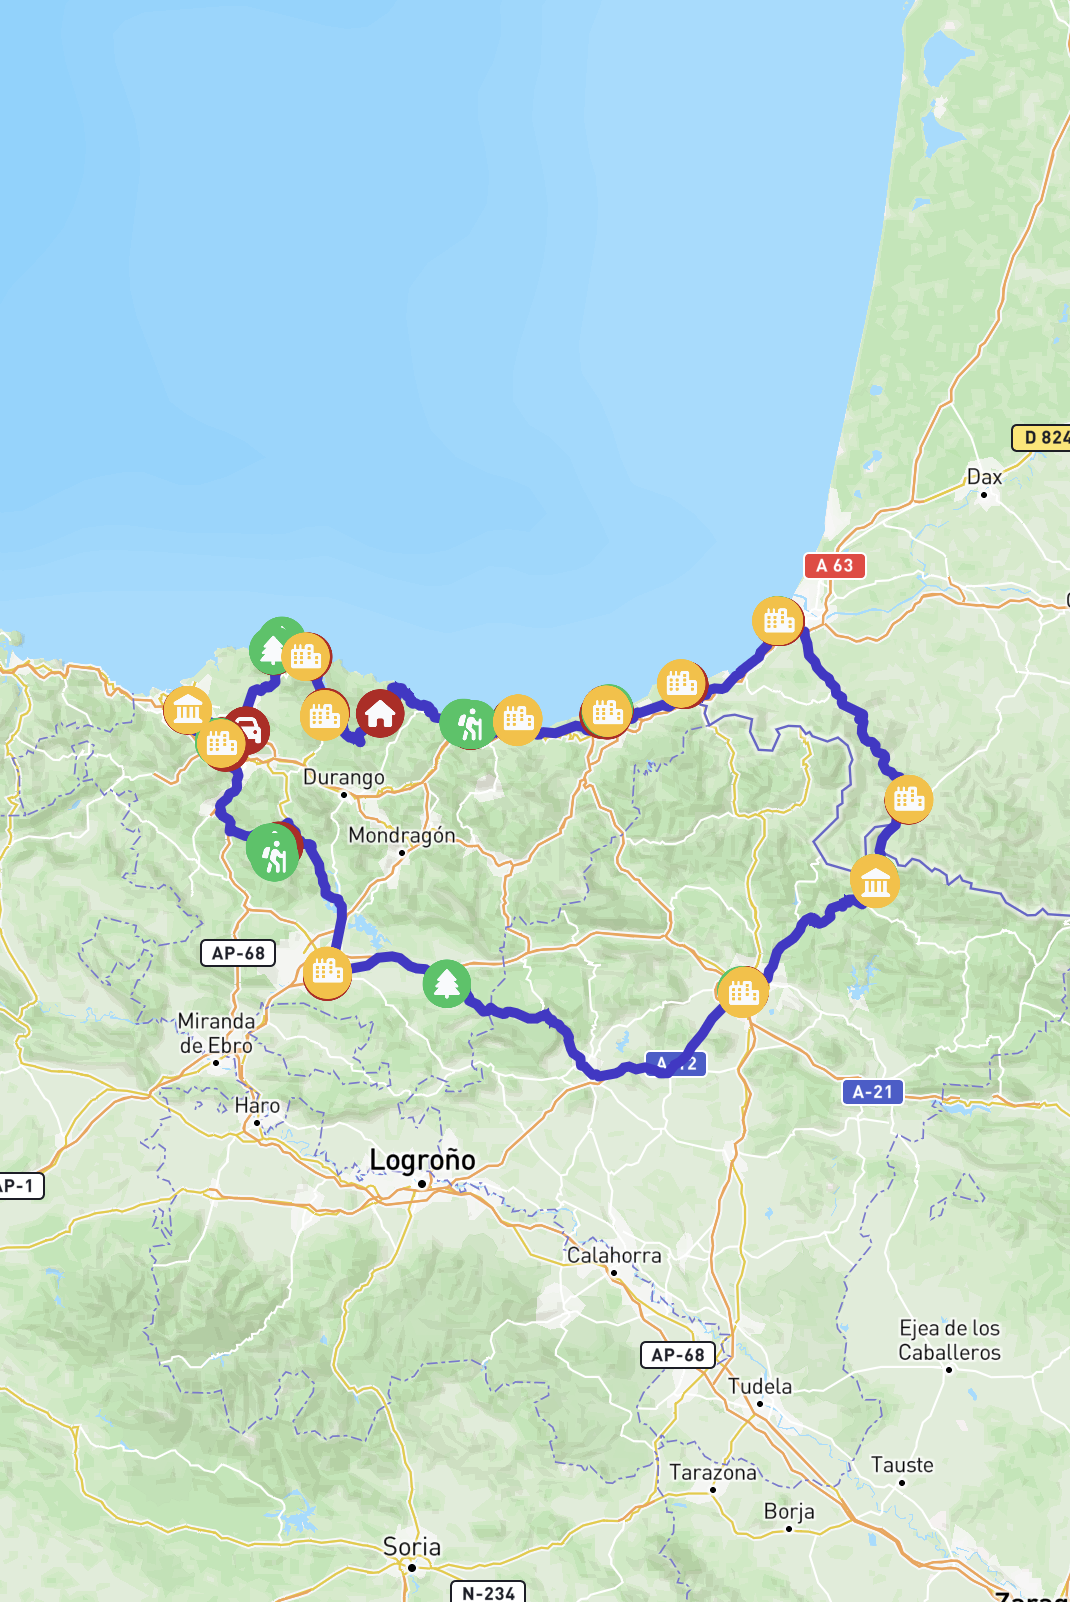 A map showing the route across Basque country in Spain.